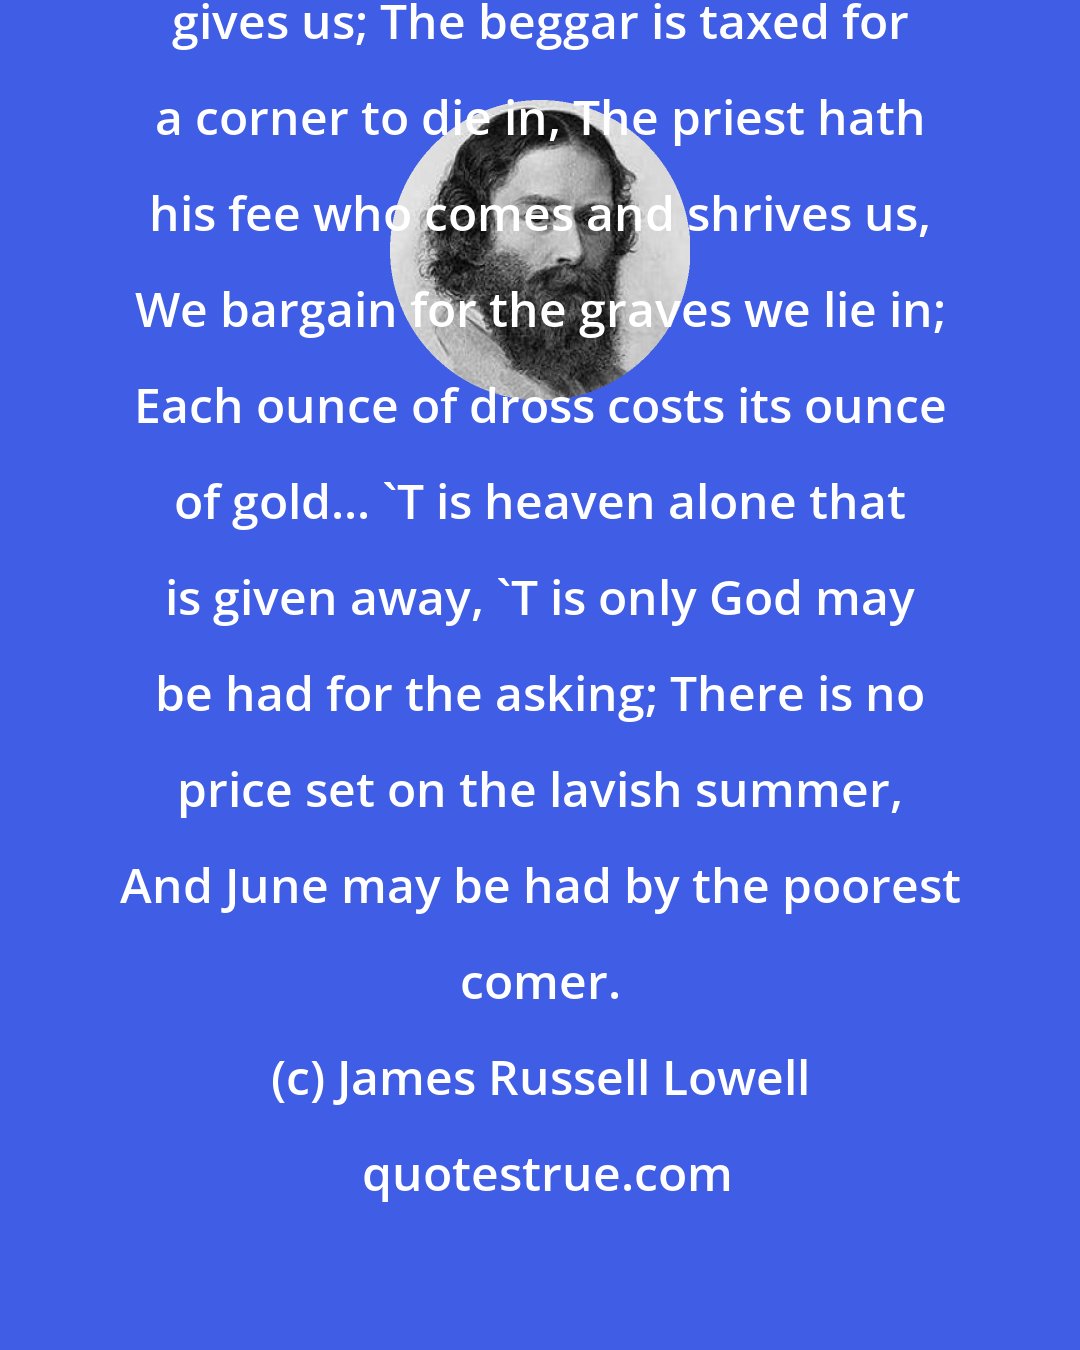 James Russell Lowell: Earth gets its price for what Earth gives us; The beggar is taxed for a corner to die in, The priest hath his fee who comes and shrives us, We bargain for the graves we lie in; Each ounce of dross costs its ounce of gold... 'T is heaven alone that is given away, 'T is only God may be had for the asking; There is no price set on the lavish summer, And June may be had by the poorest comer.